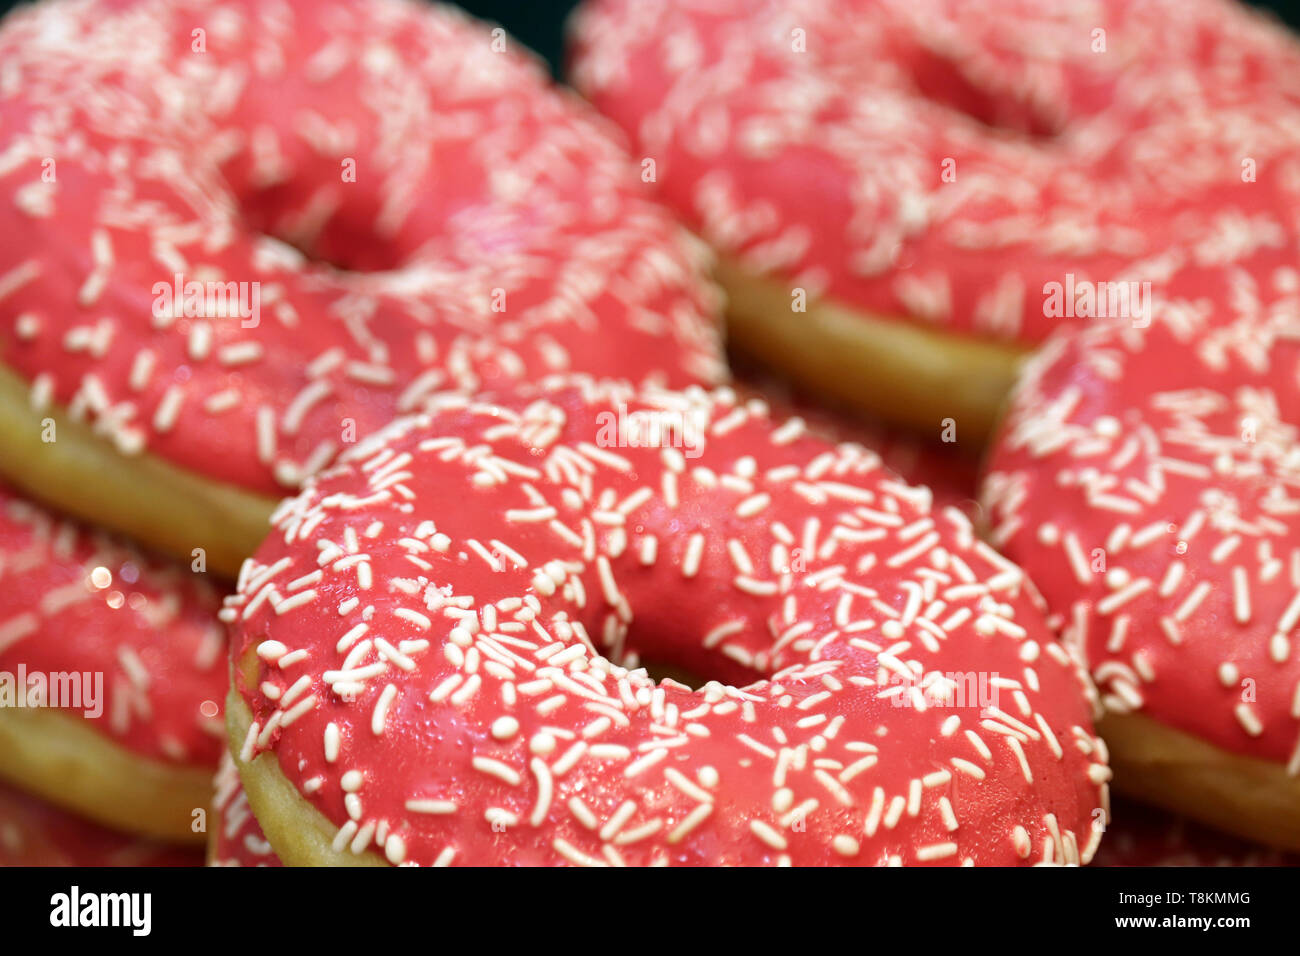 Doughnuts in pink glaze with sprinkles close up. Colorful sweet donuts for background Stock Photo